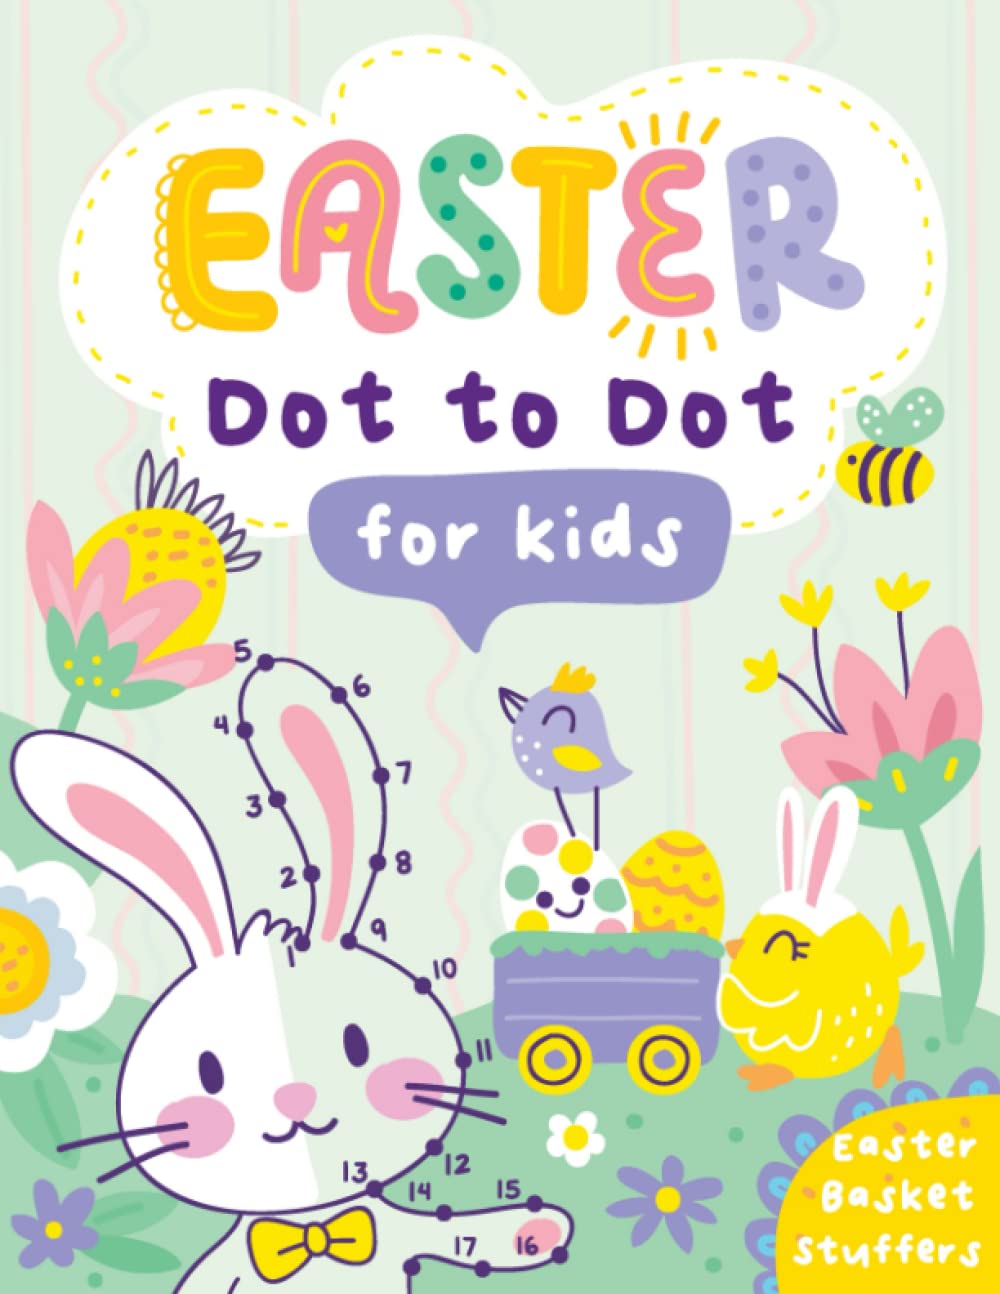 Easter Basket Stuffers: Easter Dot to Dot Activity Book for Kids Ages 4-8: Connect the Dots&Color Book with Cute Easter Themes (Easter Gifts For Kids)